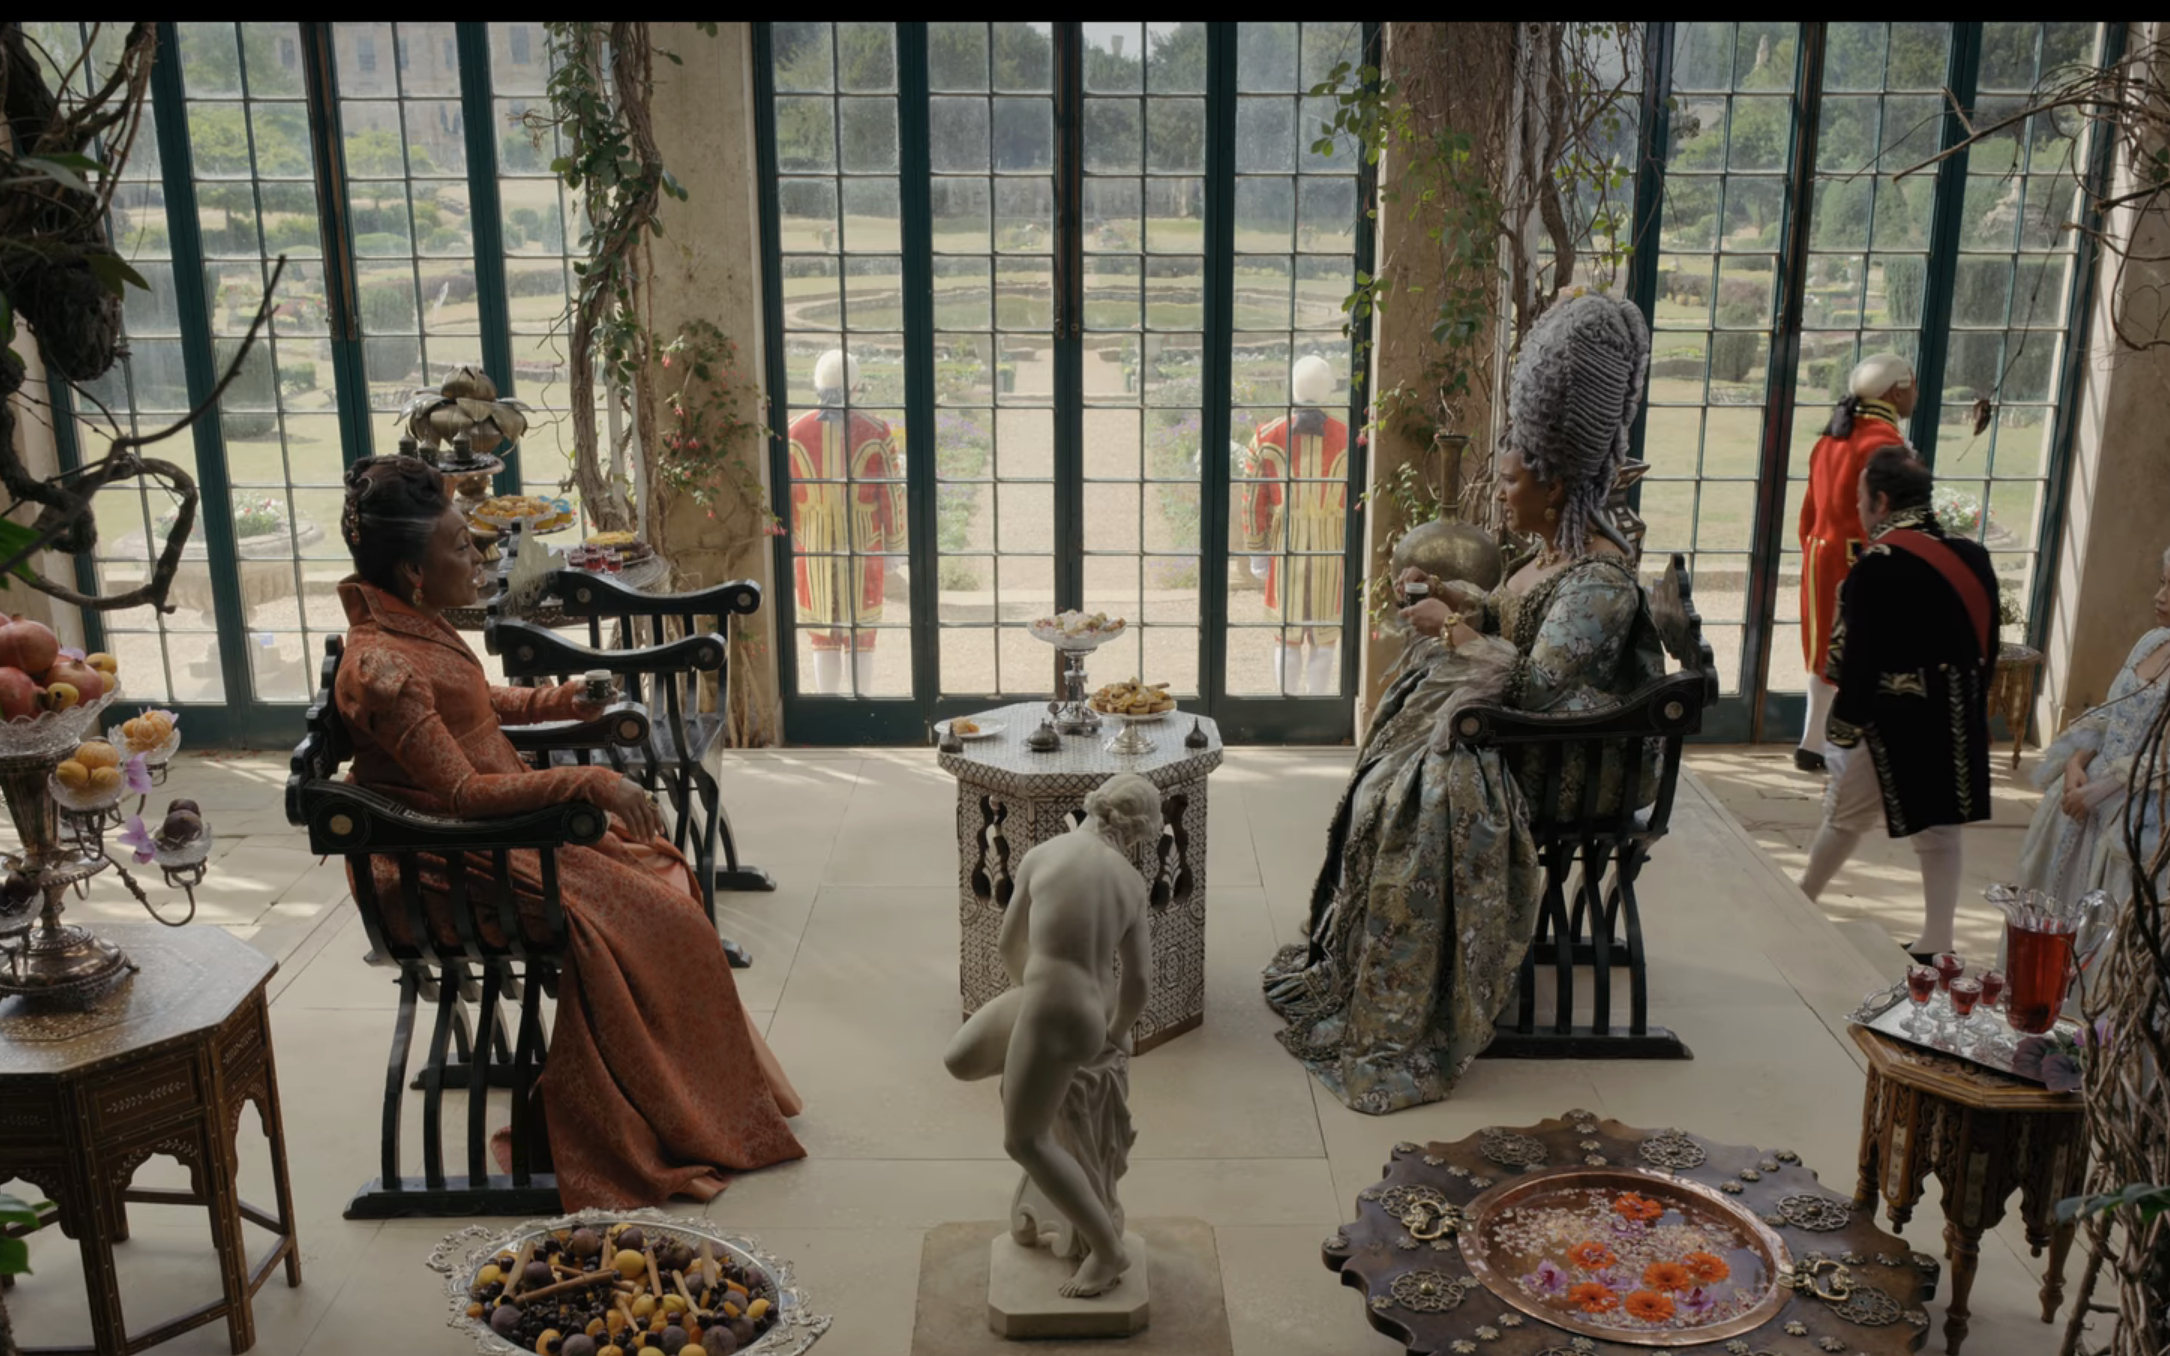 Lady Danbury and Queen Charlotte seated in wooden chairs in front of large glass doors as they have tea.